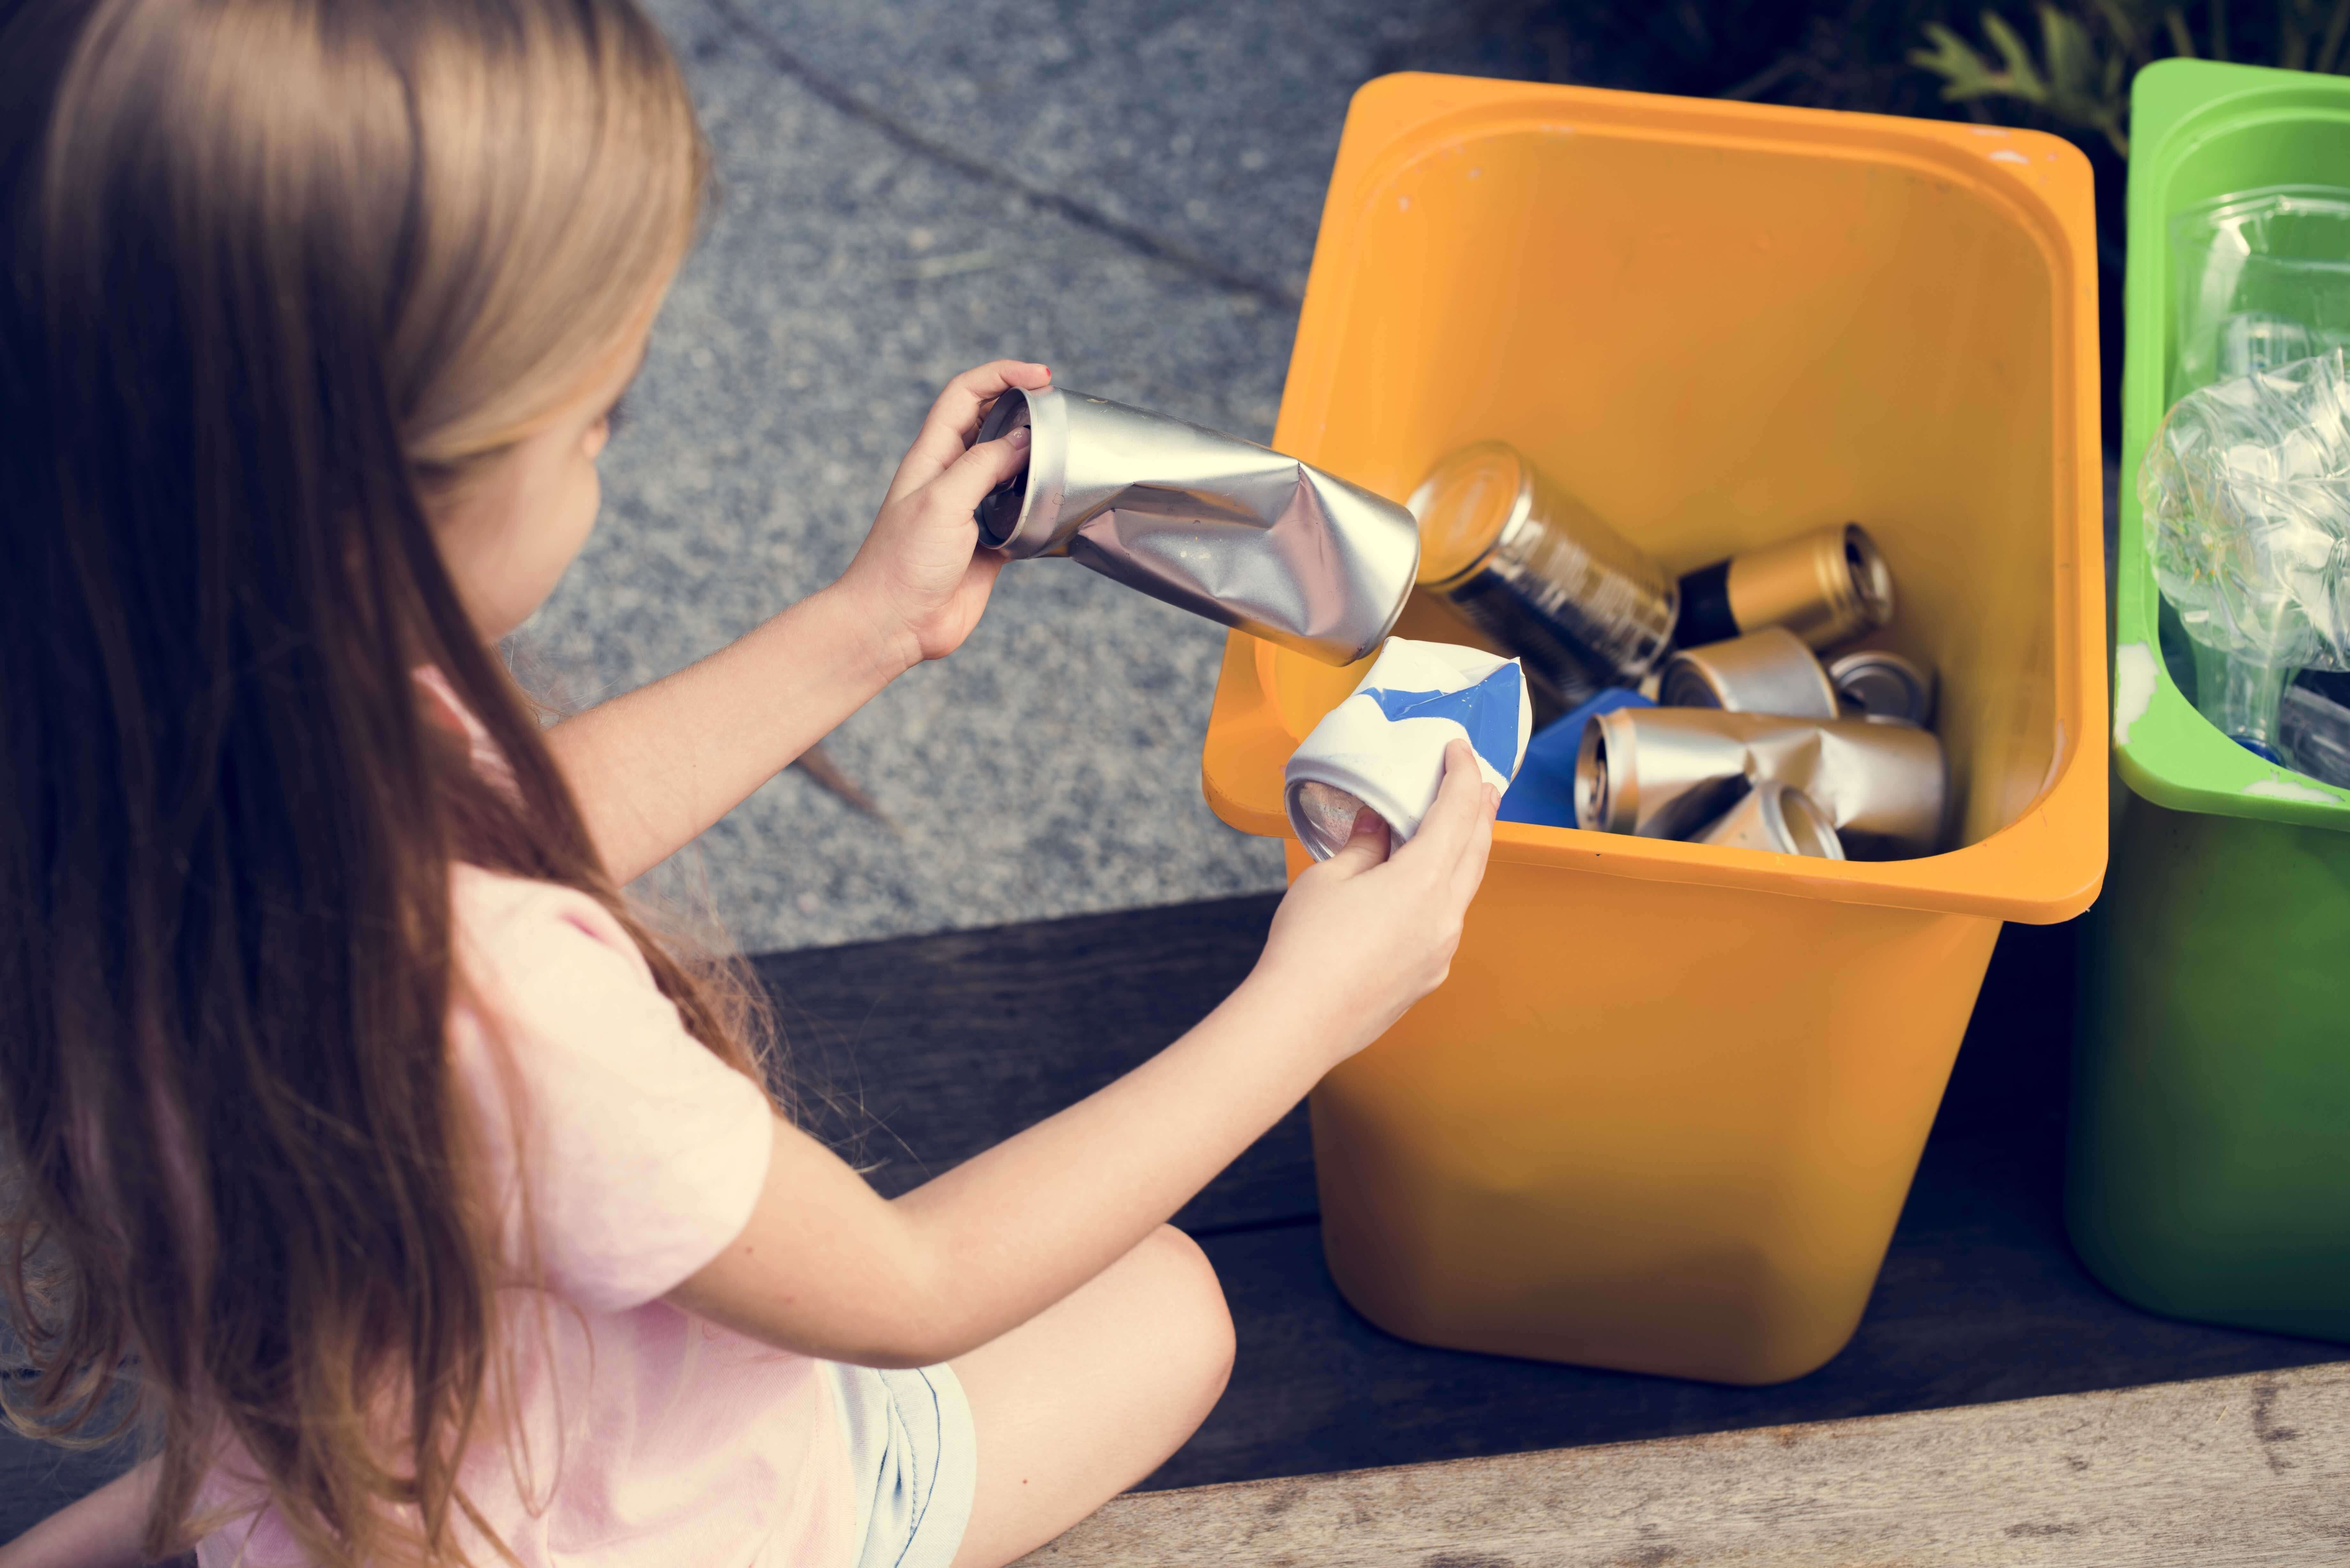 A girl sorts through recycled materials.